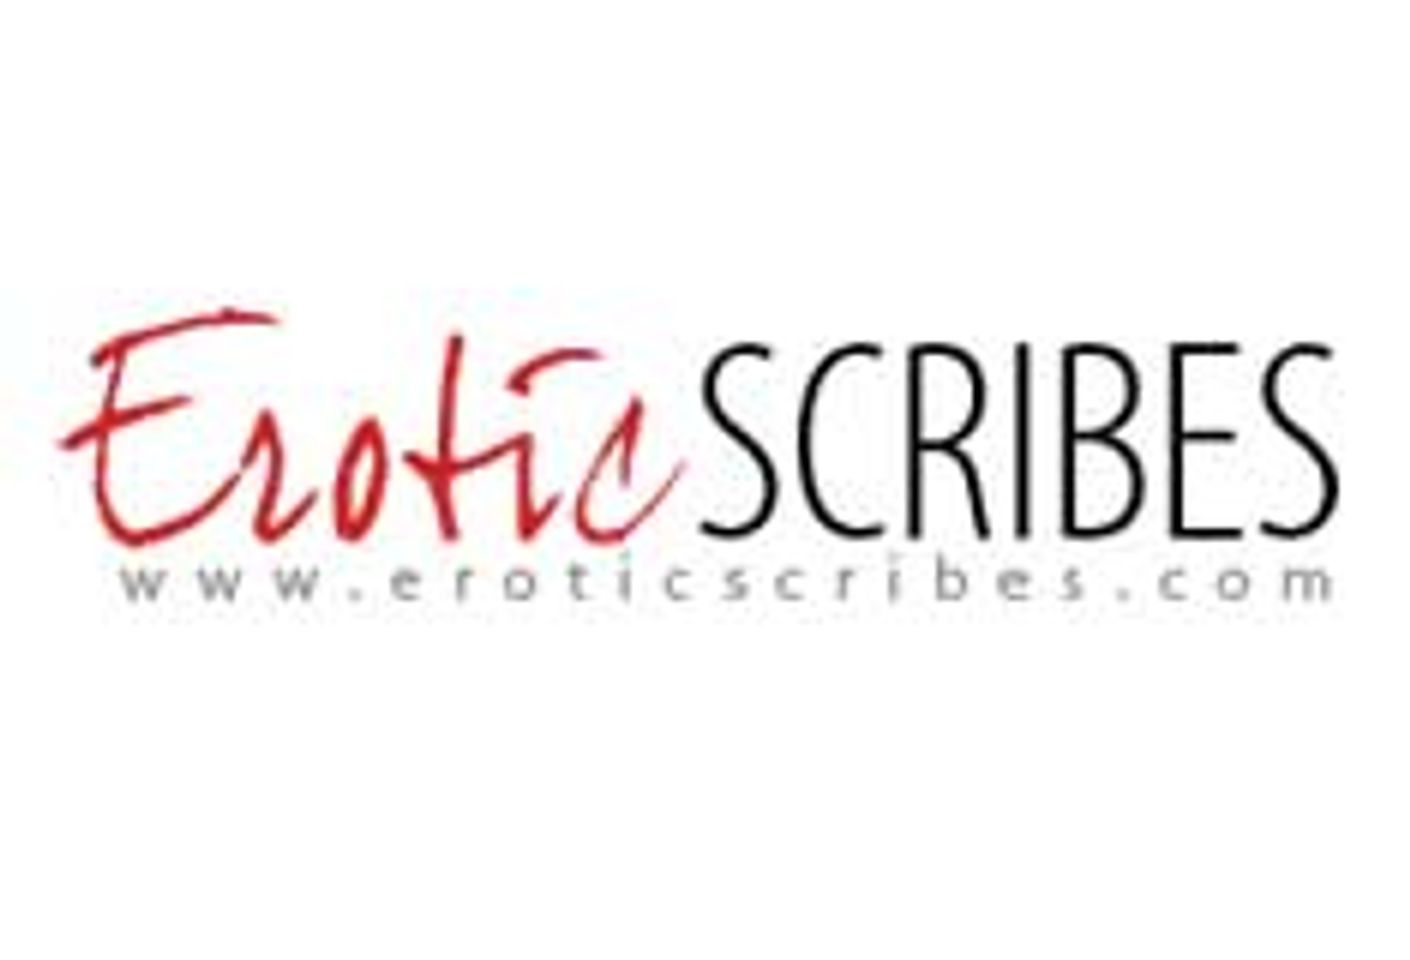 EroticScribes.com Offers Entertainment News with a Twist